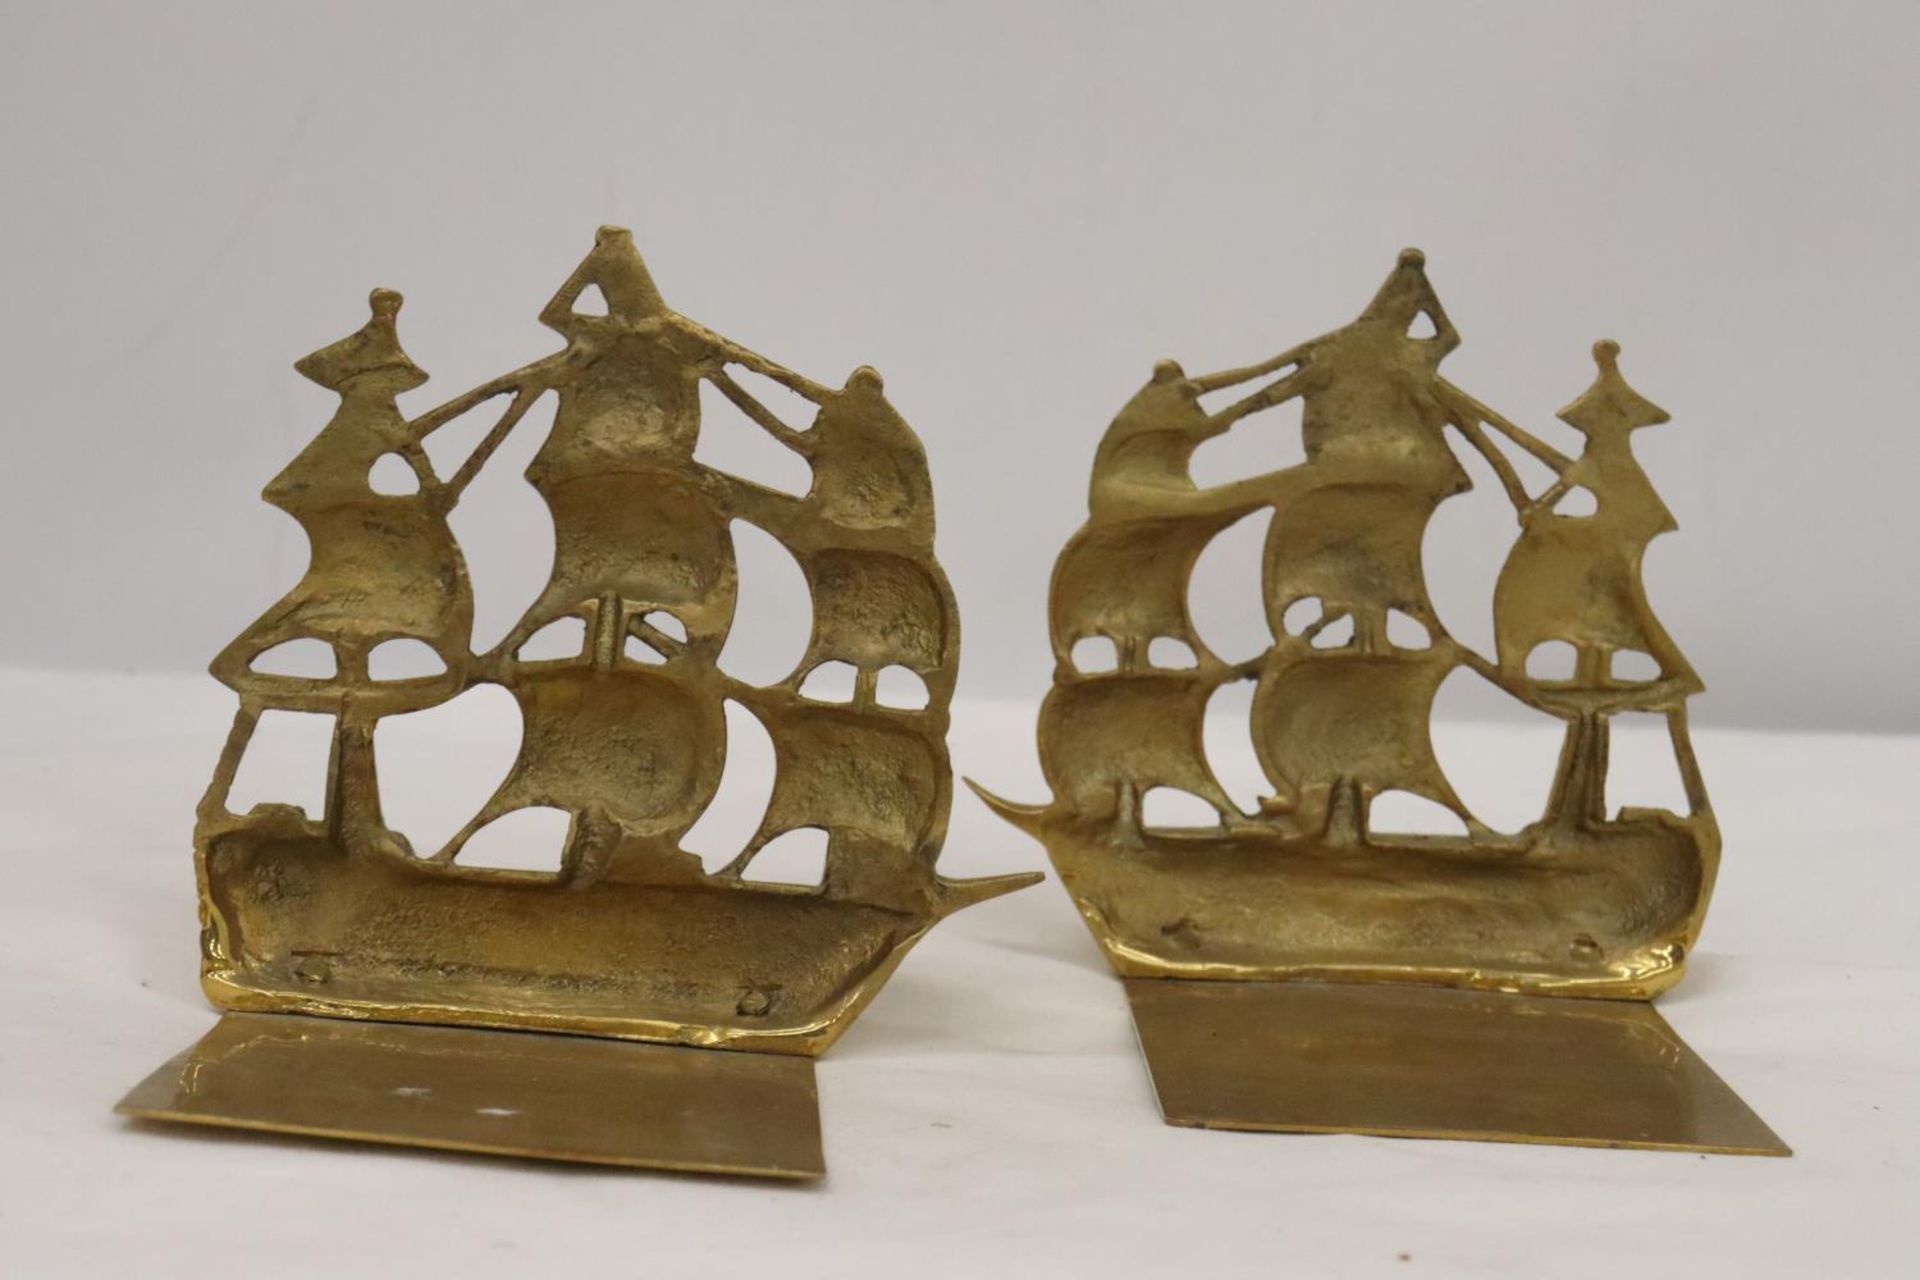 A PAIR OF VINTAGE BRASS SHIP BOOKENDS - Image 4 of 5